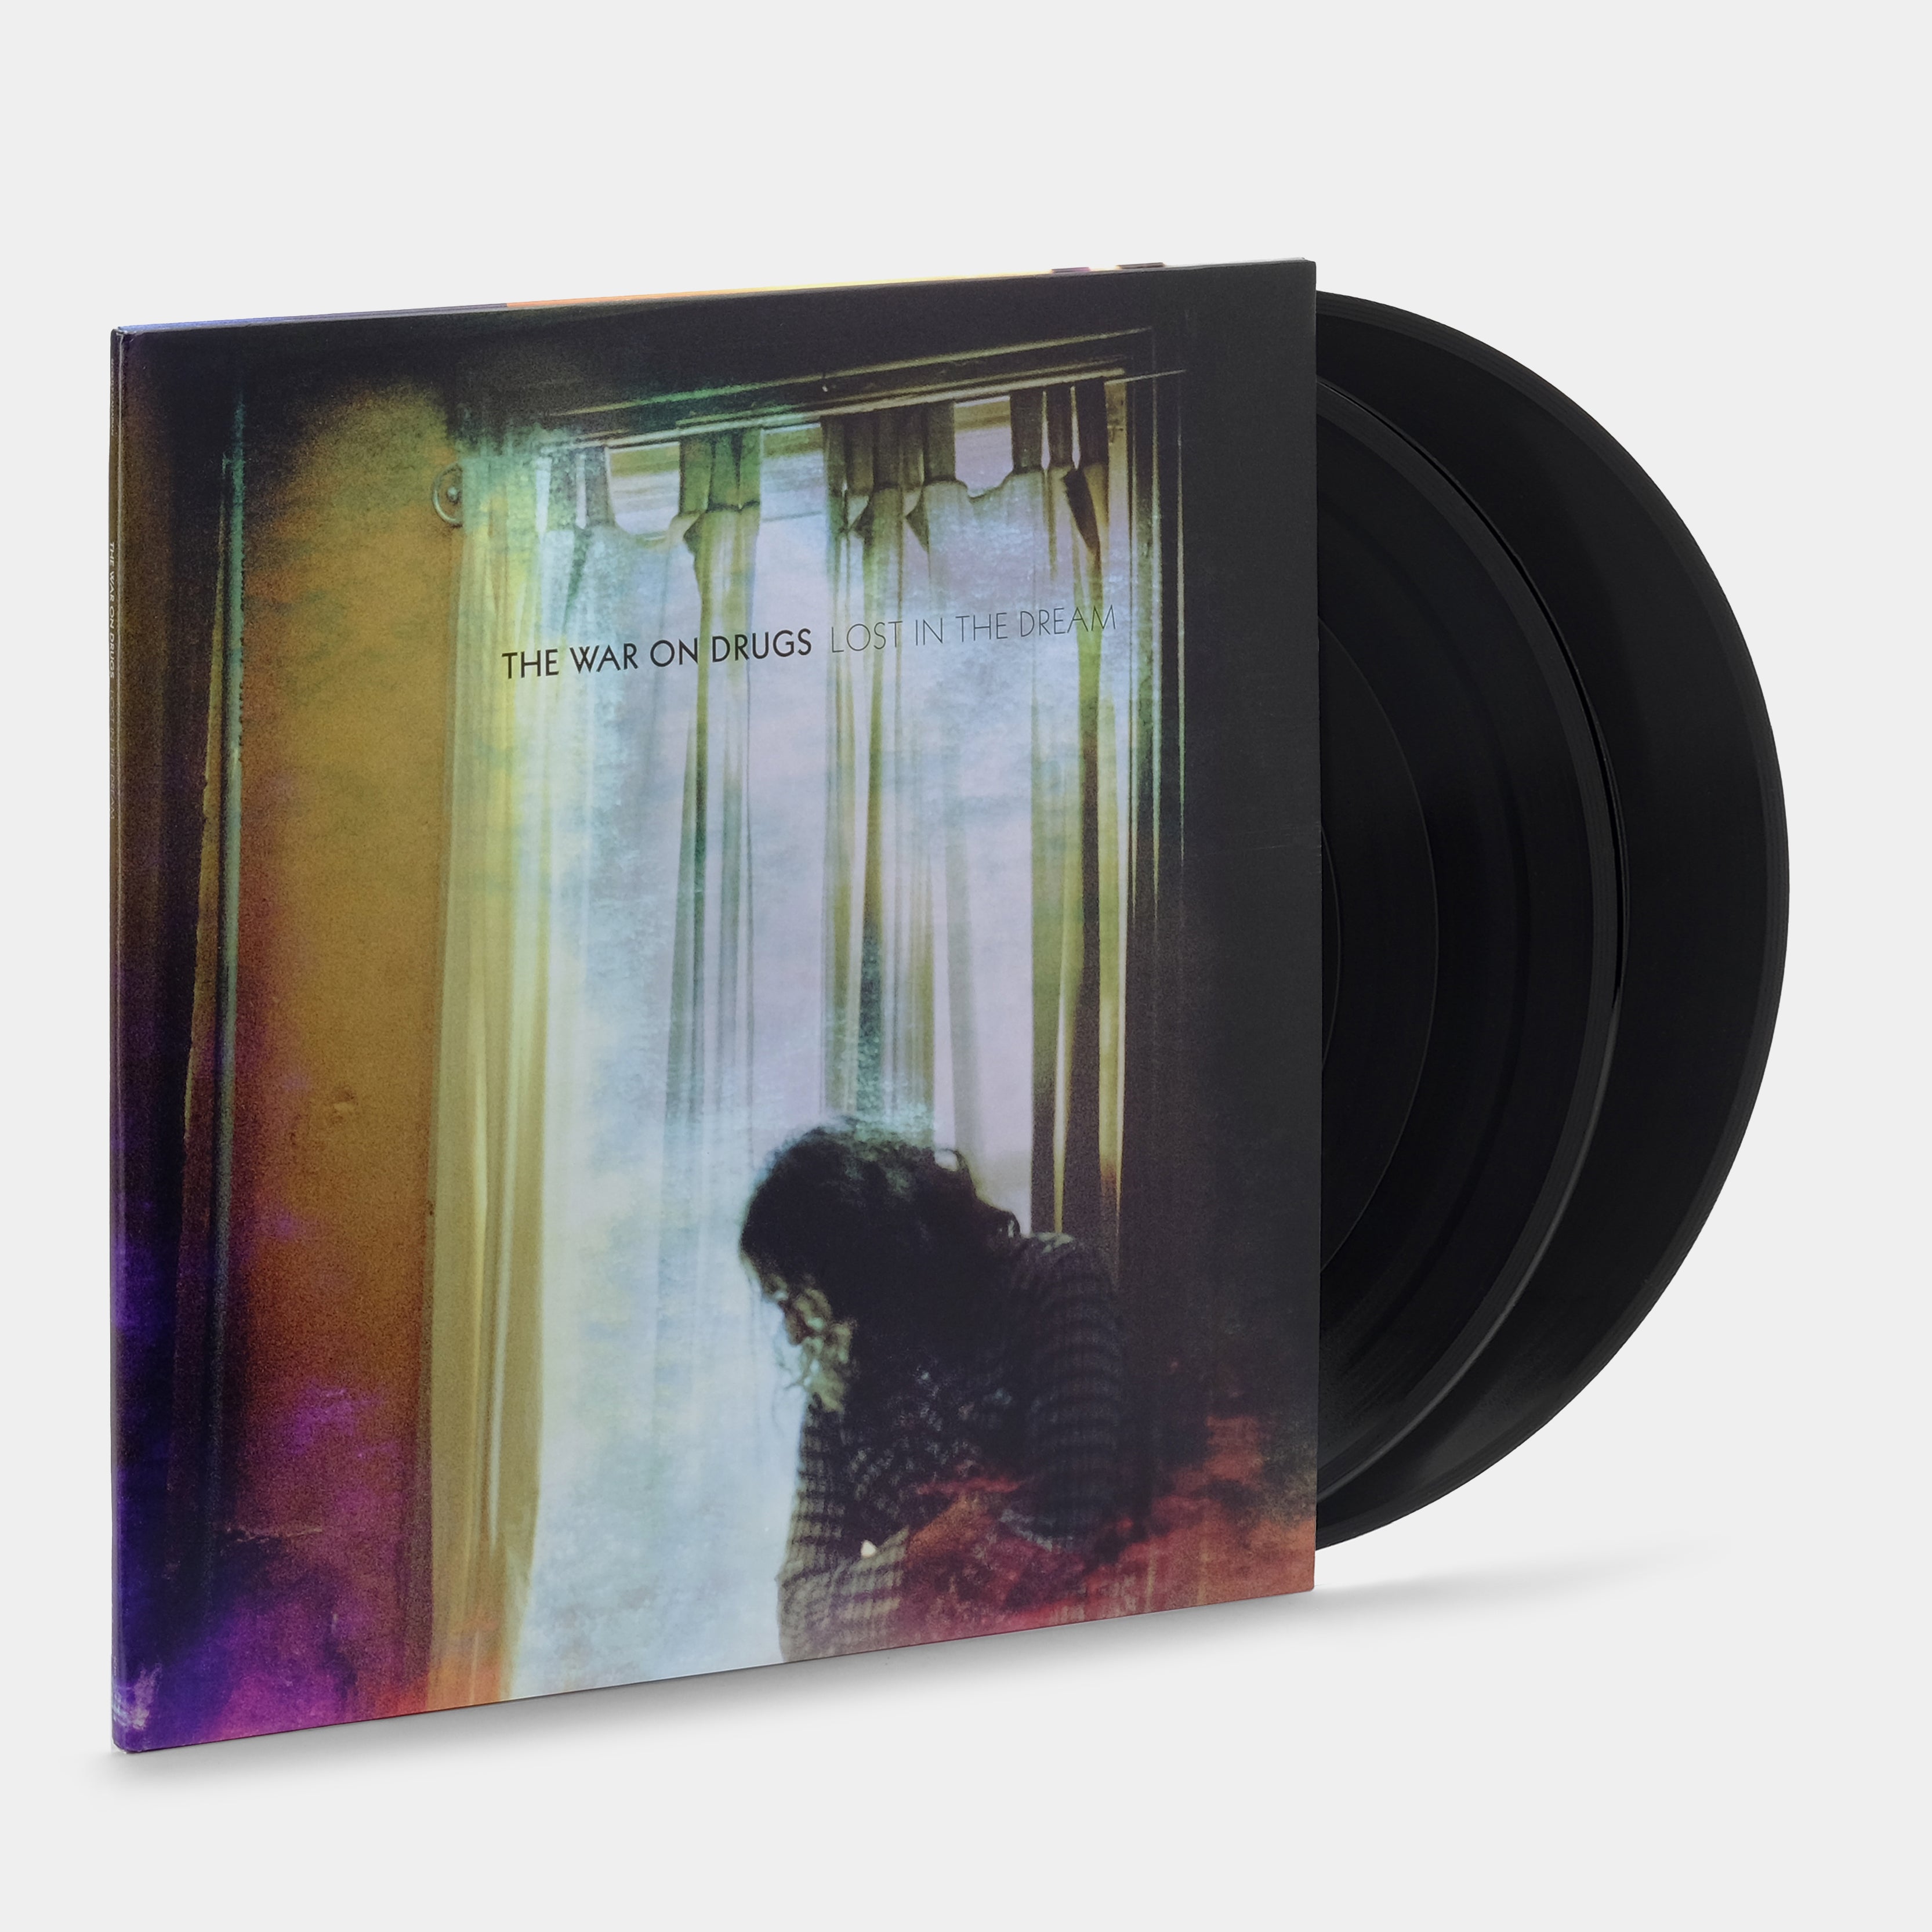 The War On Drugs - Lost In The Dream 2xLP Vinyl Record